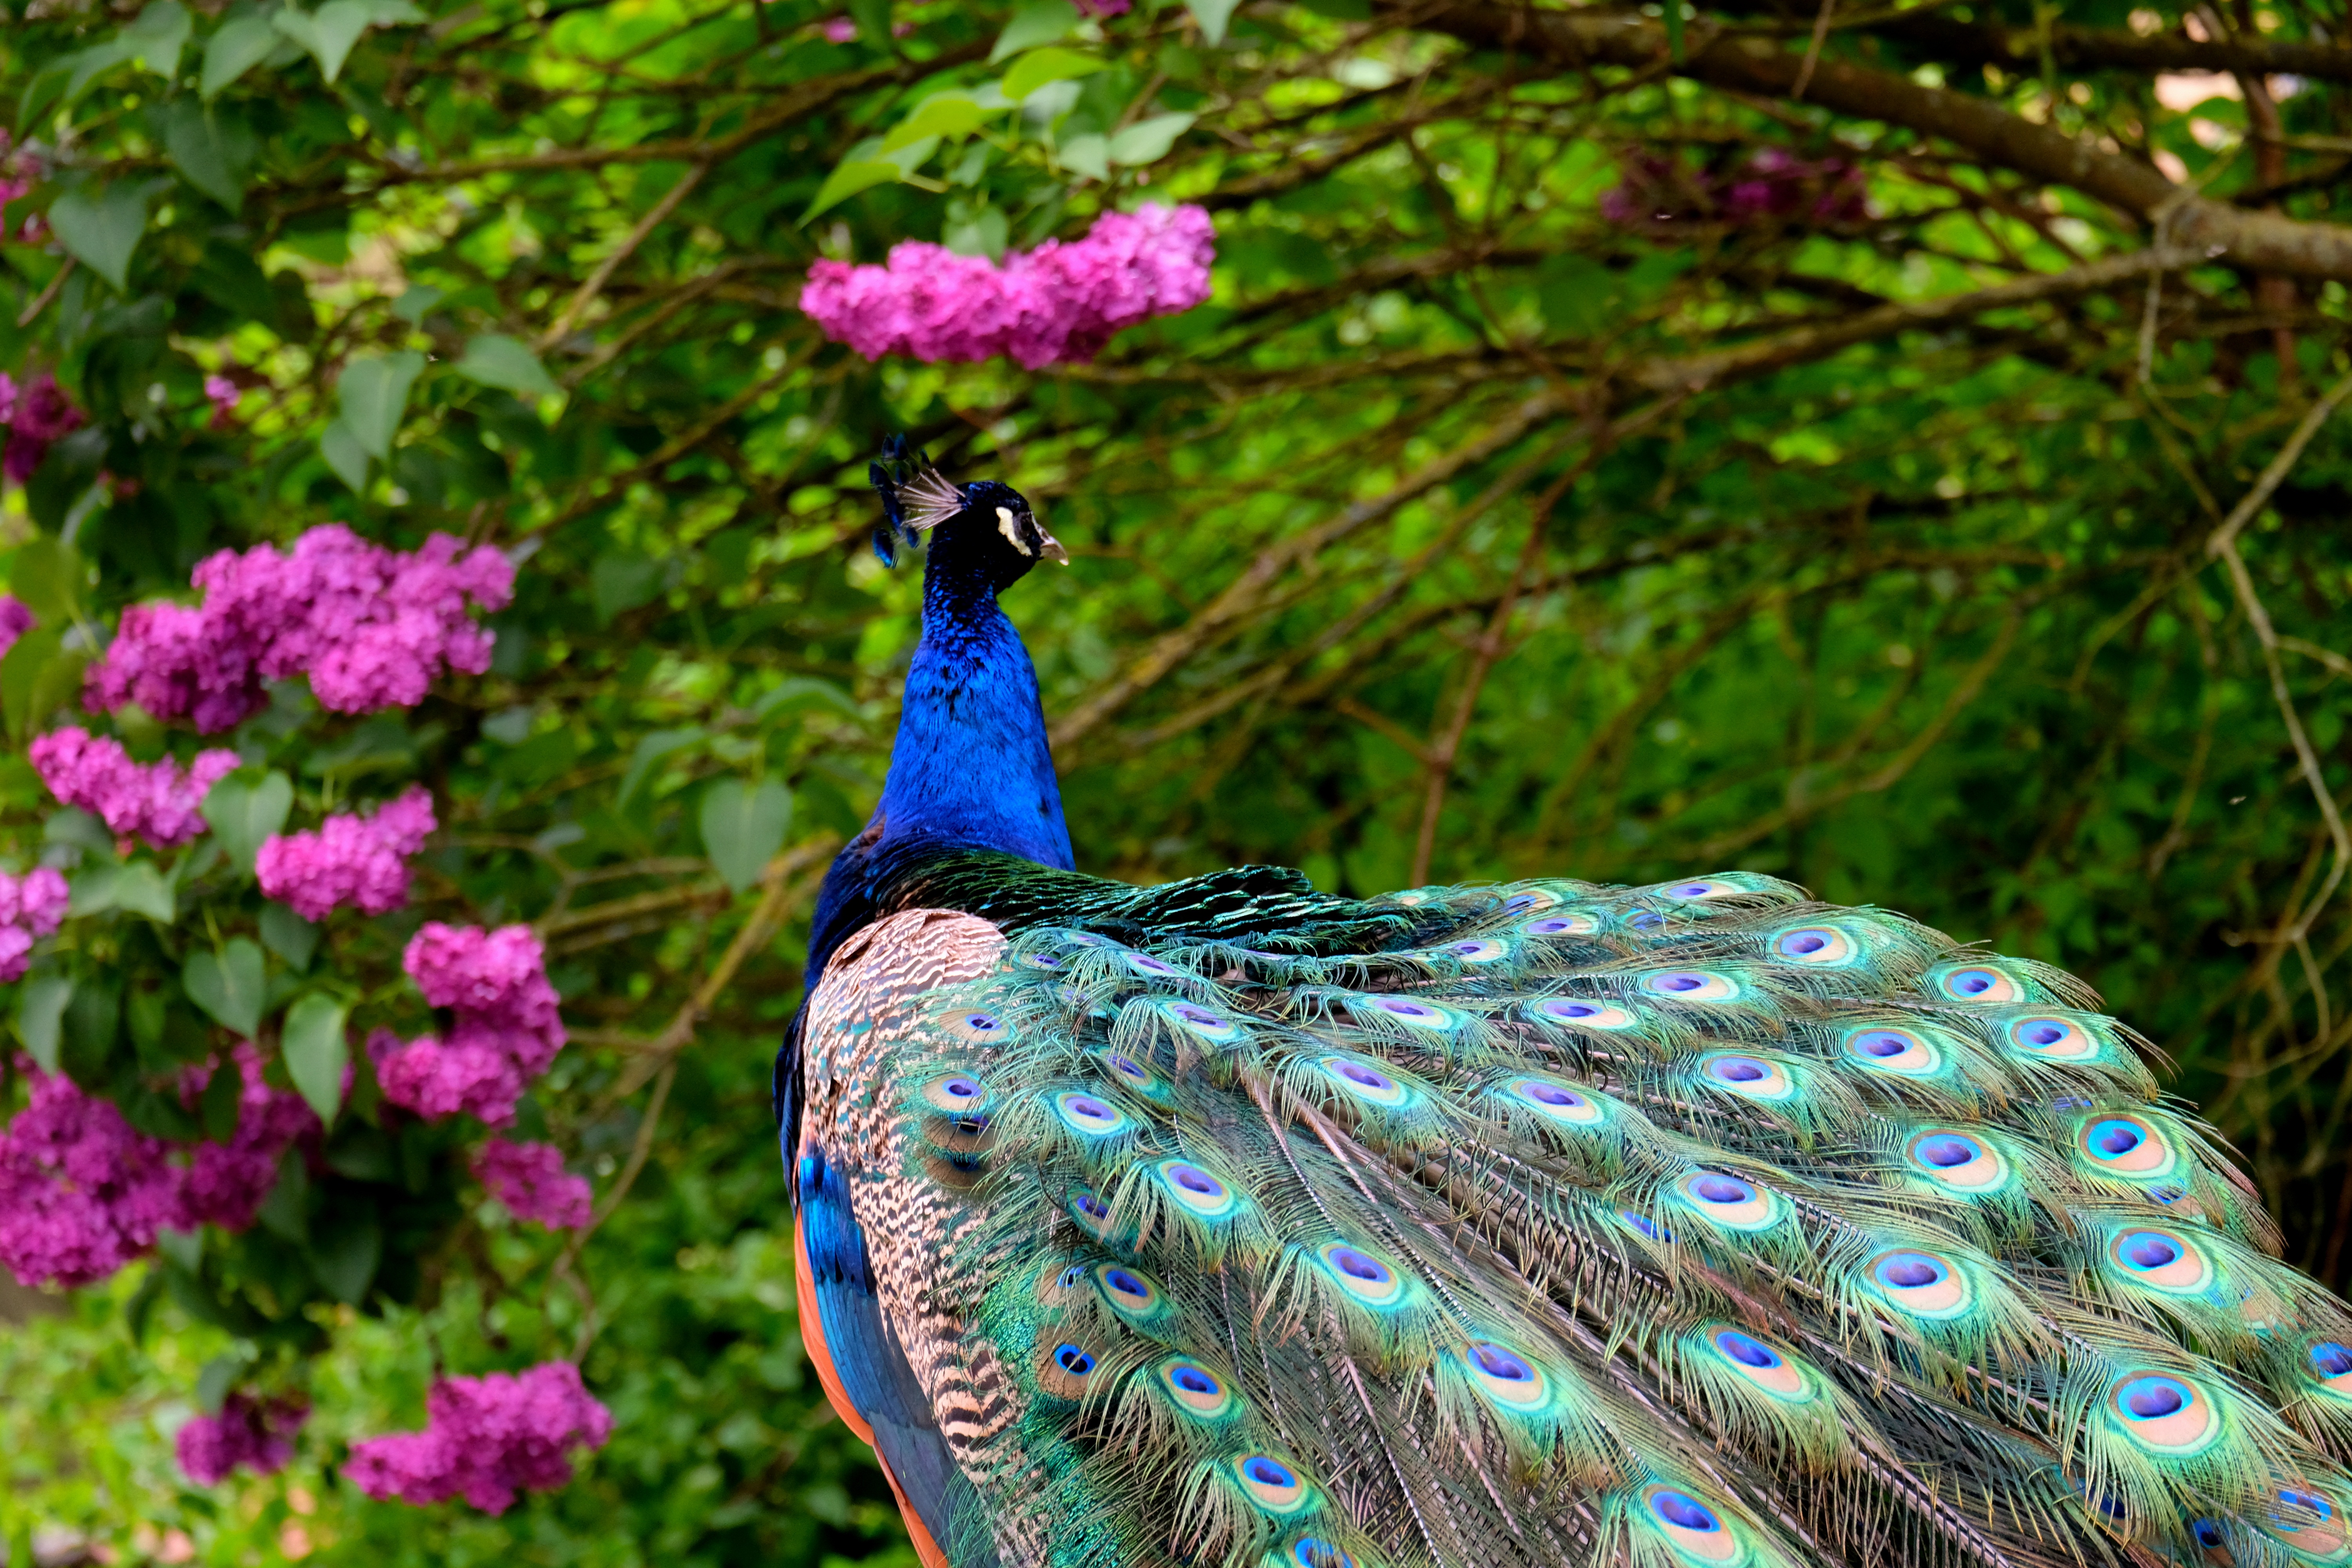 Peacock amid pink blossoms by Holger Schué